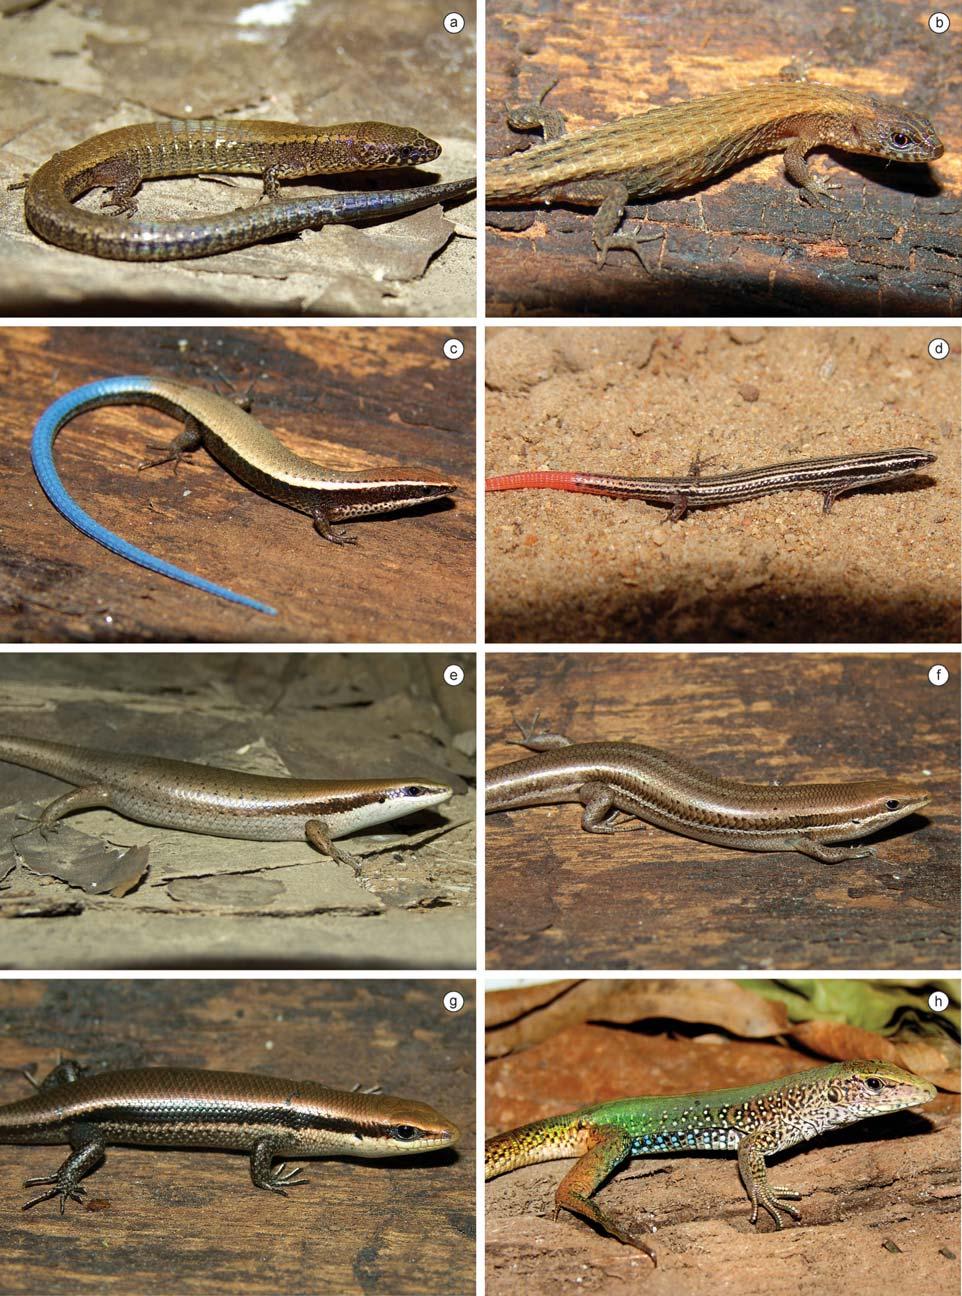 Biota Neotrop., vol. 10, no. 3 245 Amphibians and reptiles from a highly diverse area of the Caatinga domain Figure 11. Reptile species found in the region of CPI.